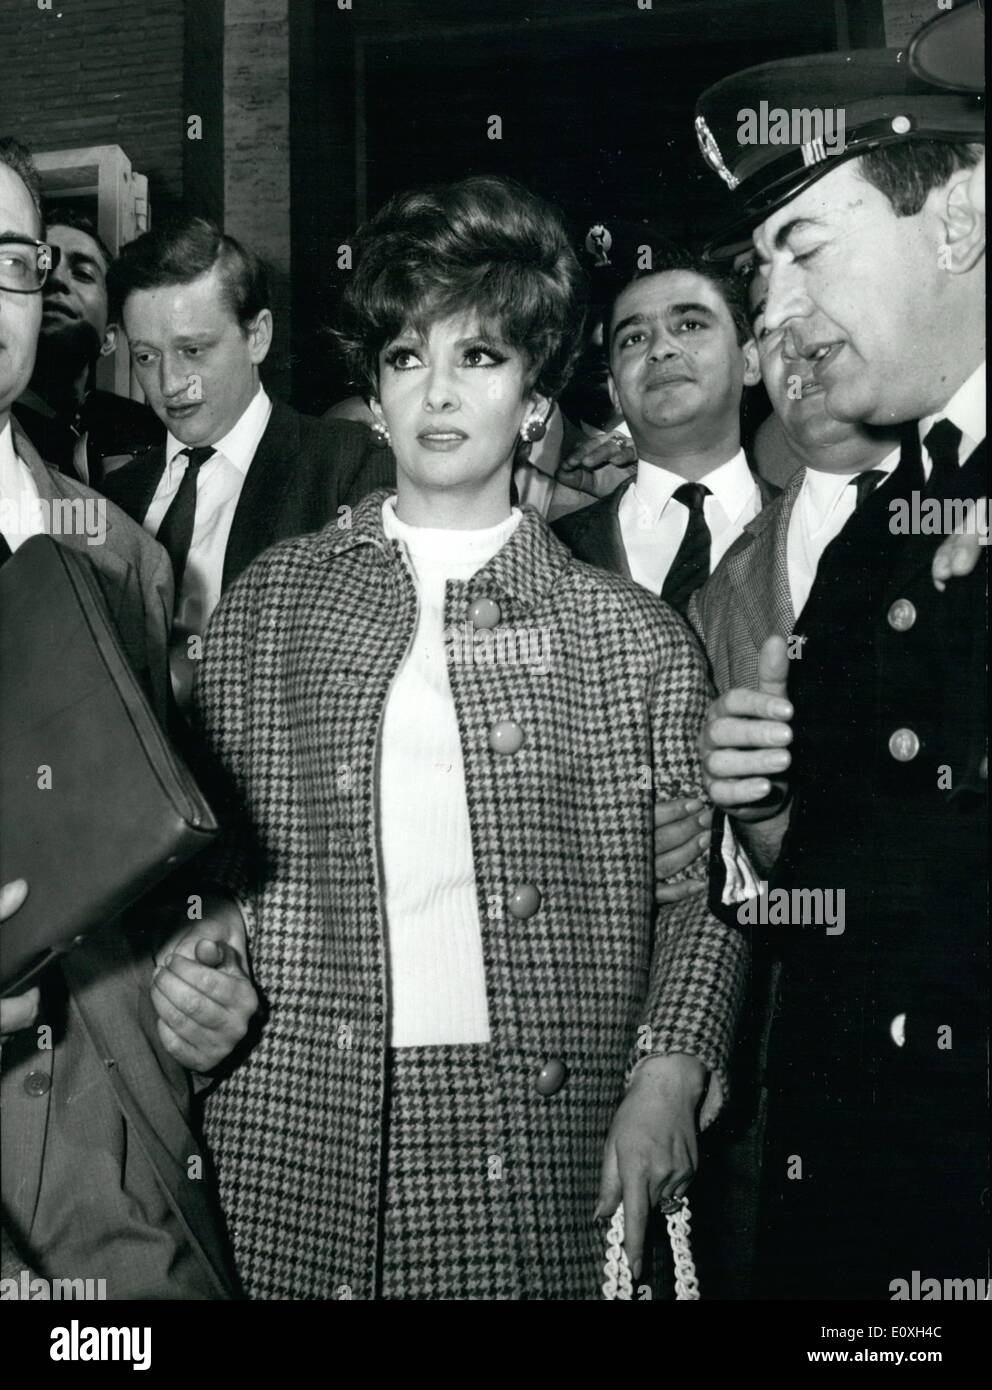 Oct. 10, 1966 - Latina: Italian actress Gina Lollobrigida and her Yugoslav-born husband Dr Milko Skofic appeared today before the president of the Civili tribunal in nearby Latina to ask them to pronounce their separation by Mutual consent. Miss Lollobrigida and Skofic were married 15 years ago. The lovely screen star and the doctor have lived separately for years. Last Jube they separated. After the marriage in 1951, Skofic gave up his medical career to become the actress adviser. He is now a publisher of Publishing Home ''Salani'' of Florence. Stock Photo